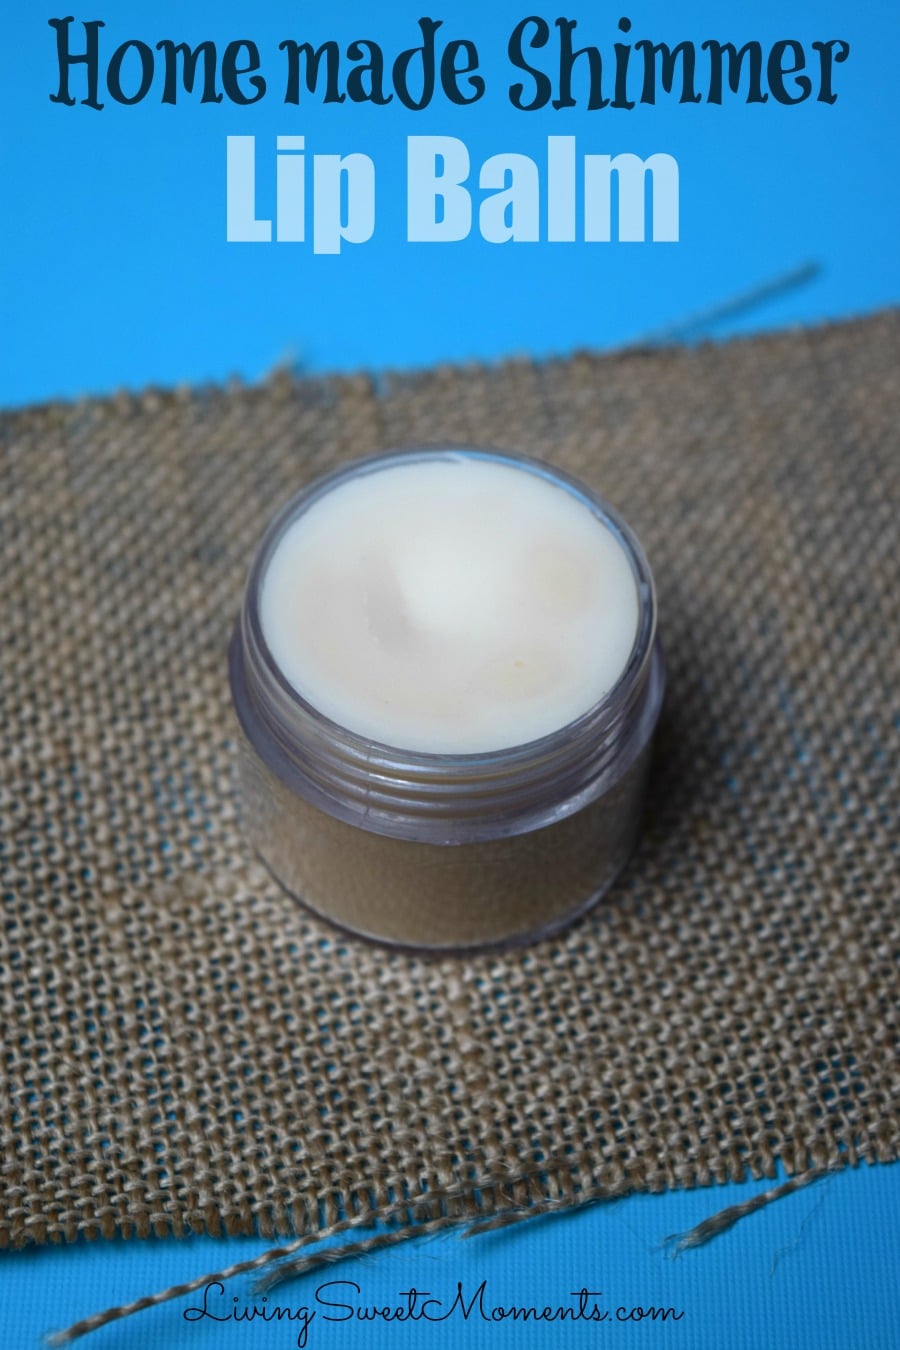 Homemade Lip Balm - Very easy to make and only requires 3 ingredients: coconut oil, beeswax and eye shadow for a shimmering effect. Perfect DIY Gift Idea. 